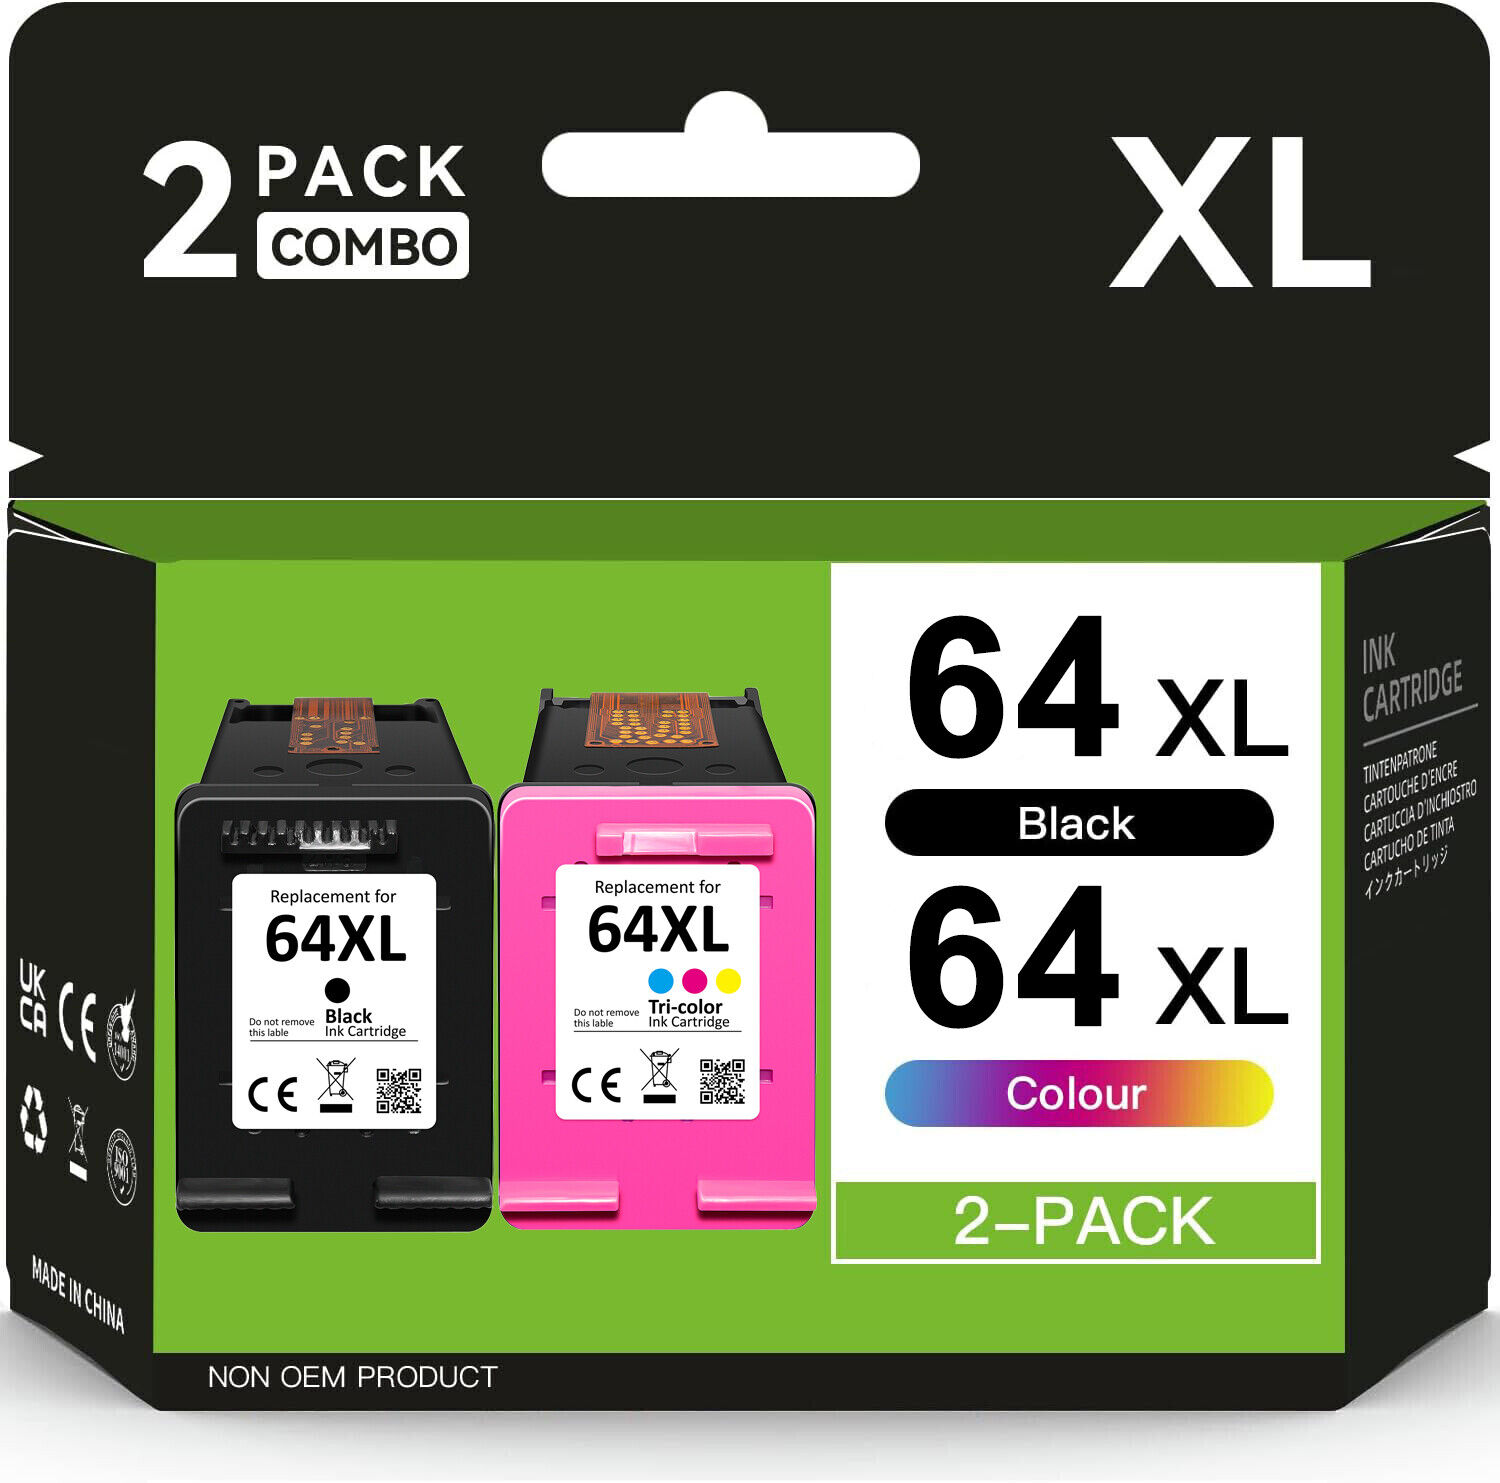 2 Pack 64 XL Ink Cartridge Combo for HP ENVY Photo 6252 6255 7155 7855 6220 6230